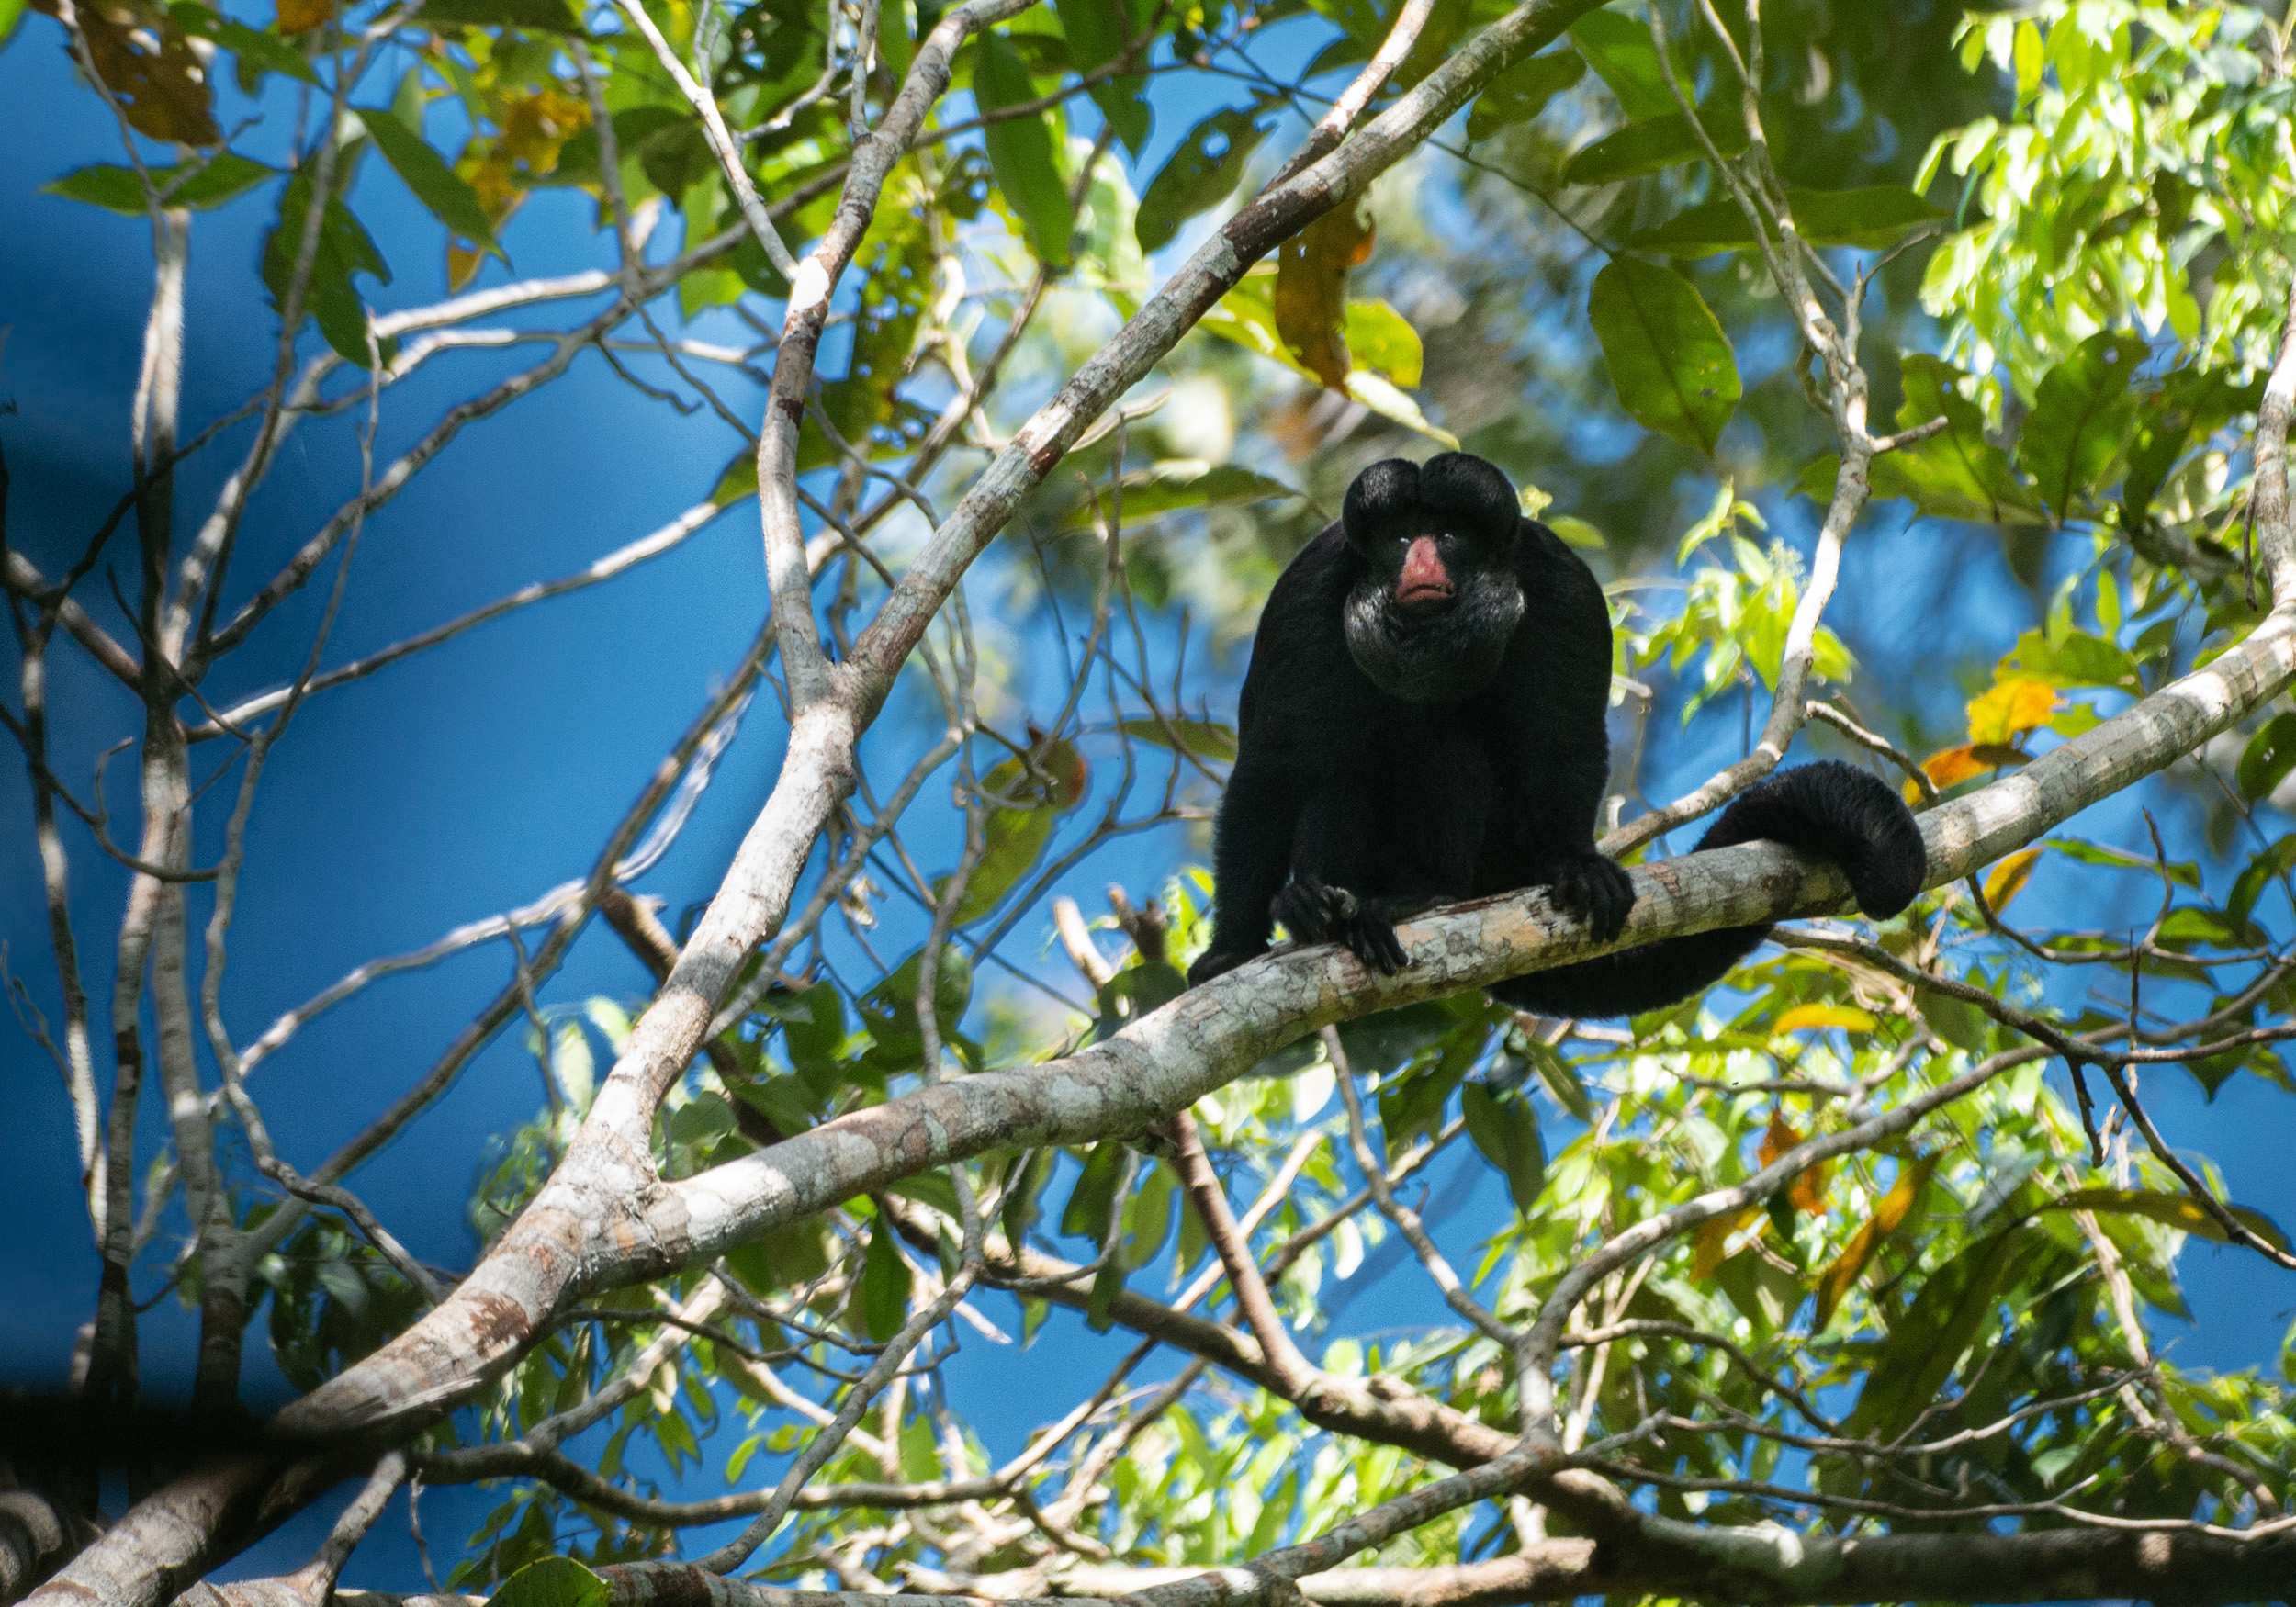 A black monkey with a pinkish nose and mouth sits on a leafy tree on a sunny day.